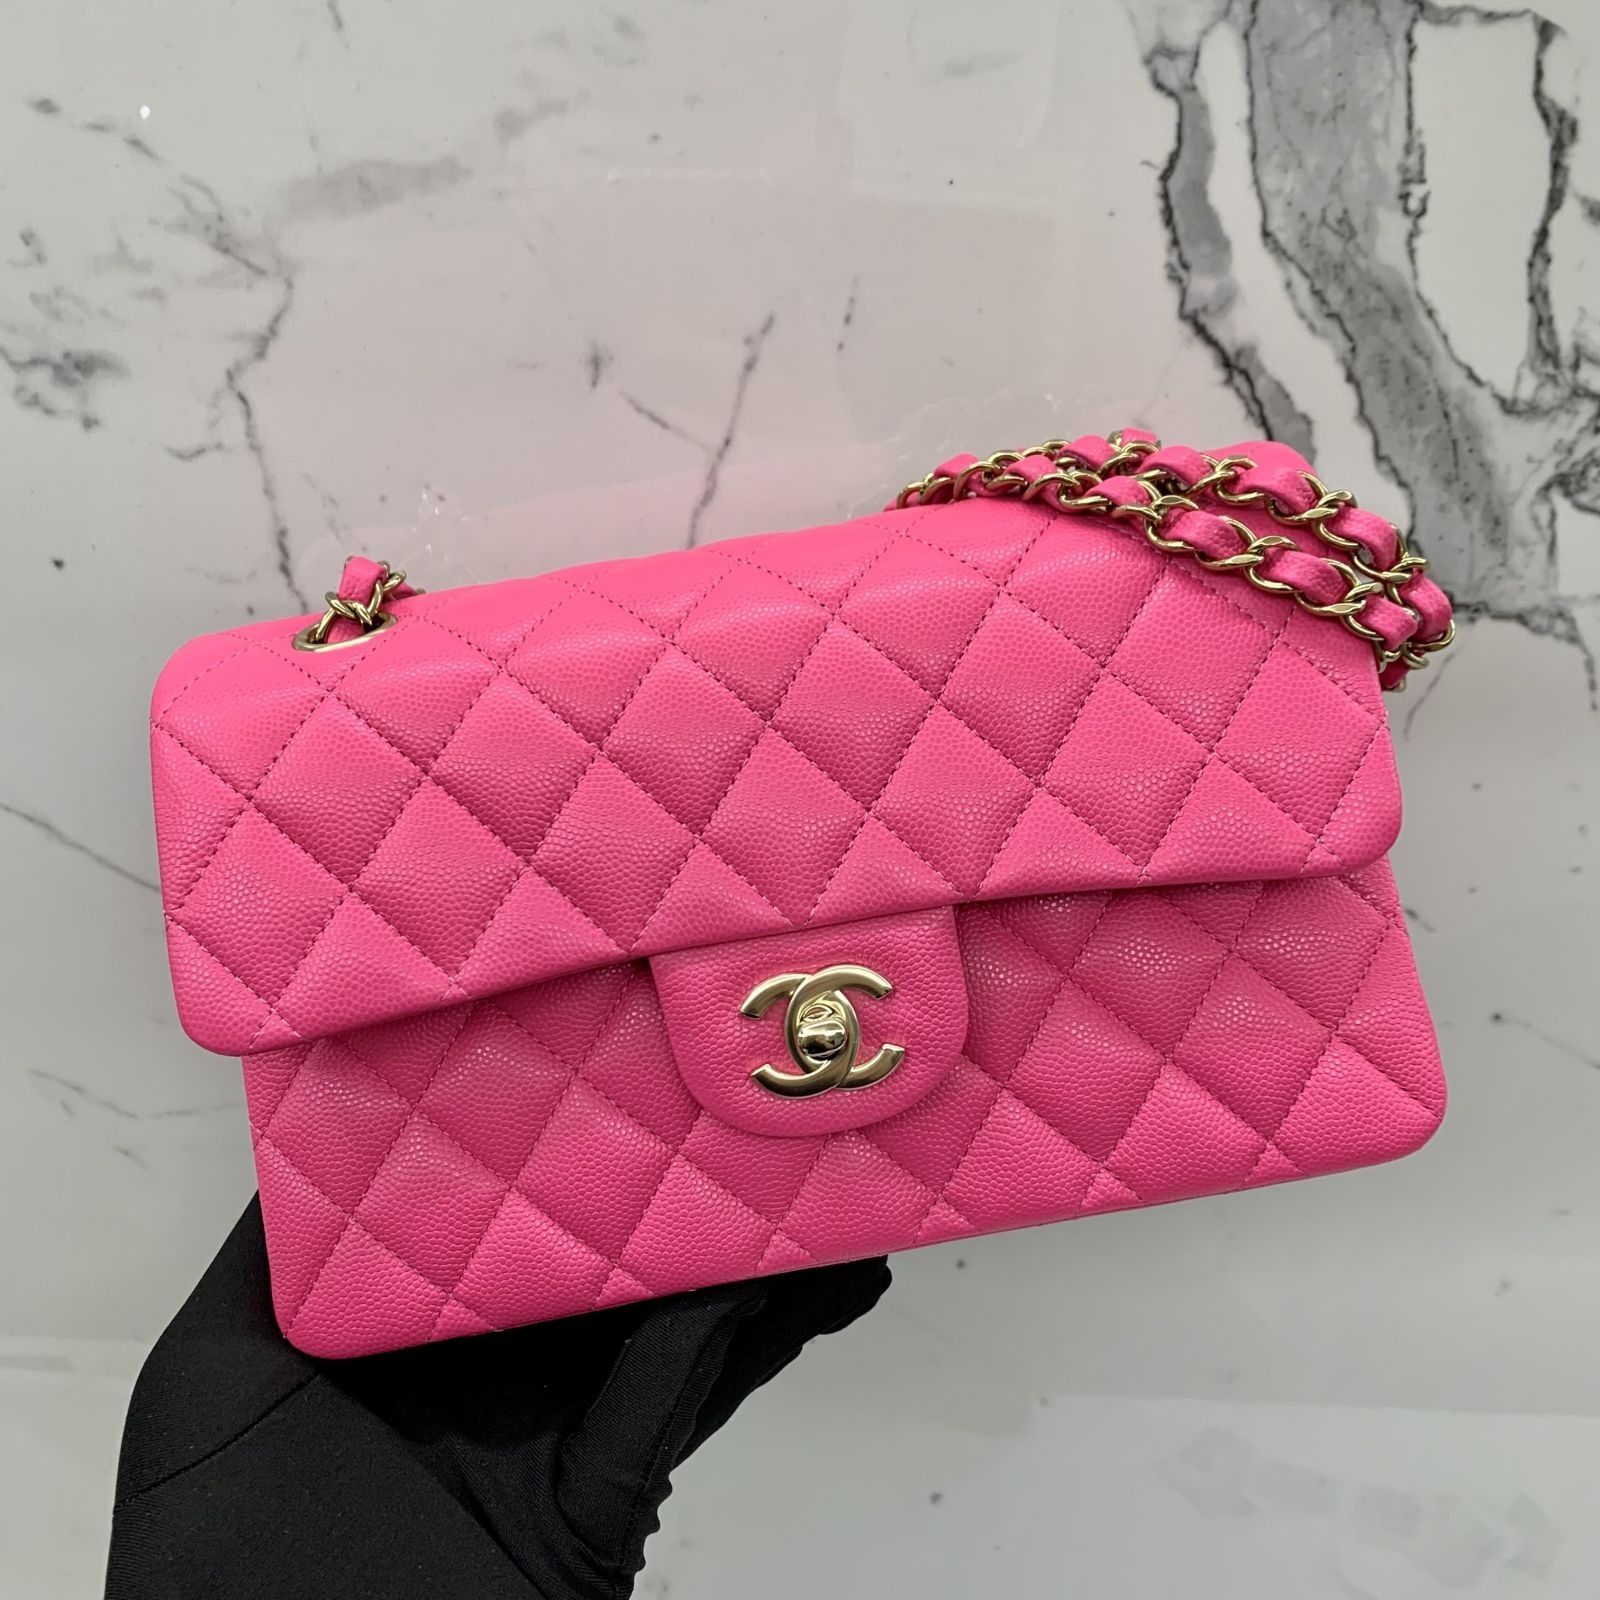 CHANEL CAVIAR SKIN PINK SMALL CLASSIC DOUBLE FLAP MICROCHIPPED